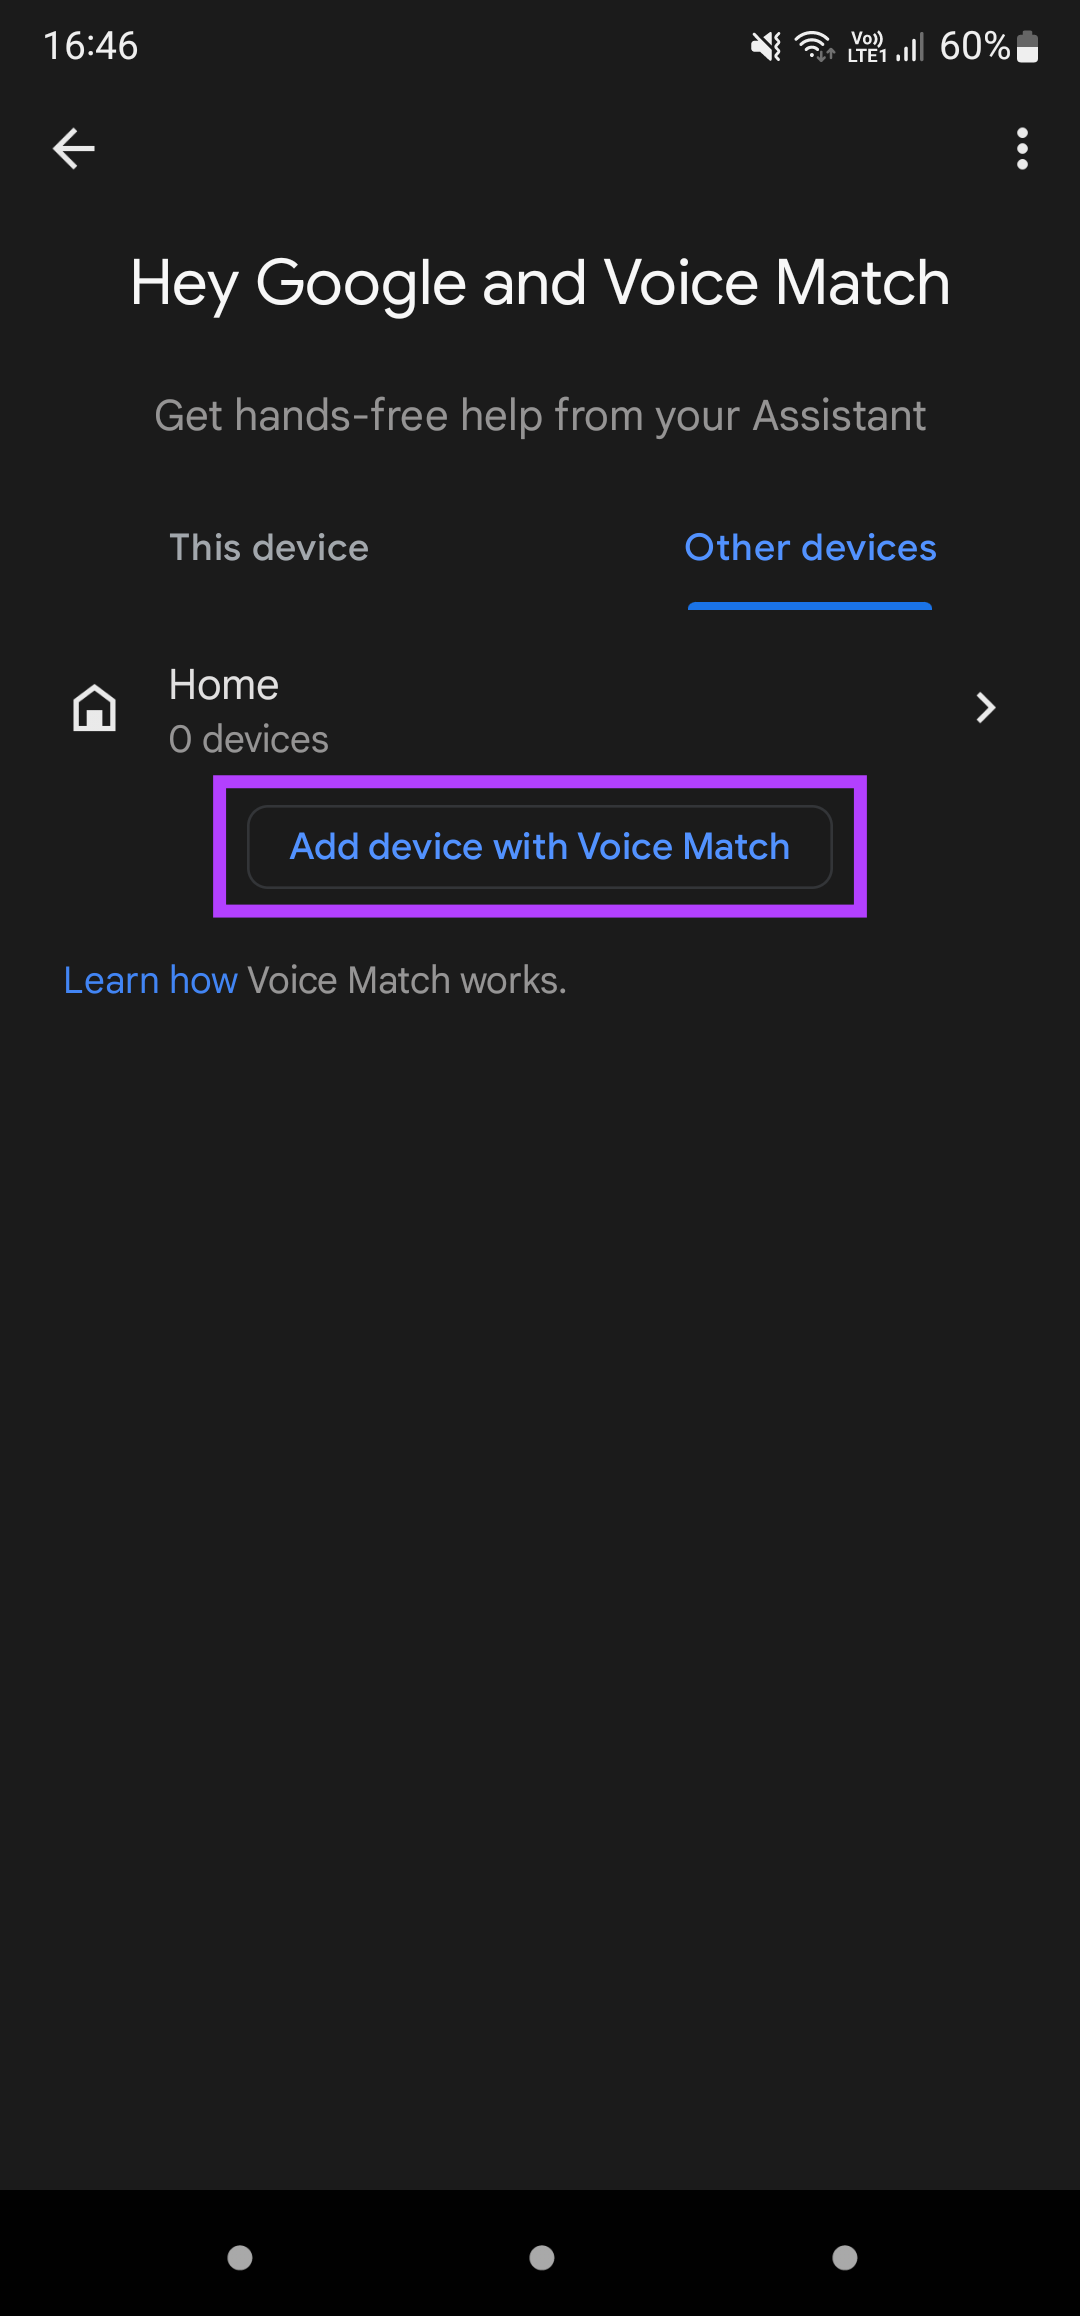 Add device with Voice Match